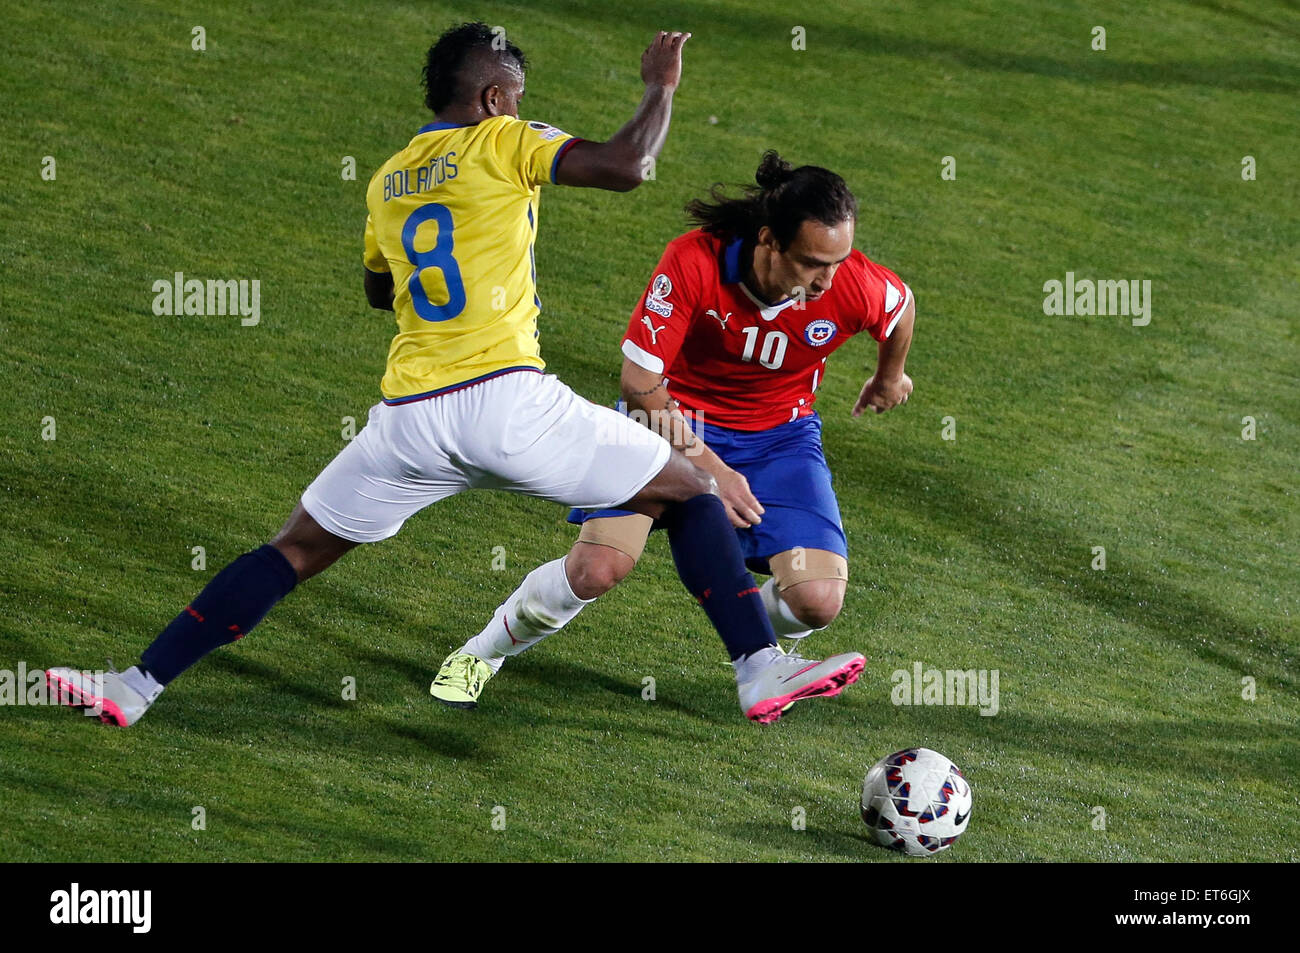 Santiago, Chile. 11th June, 2015. Jorge Valdivia (R) of Chile vies for the ball with Miller Bolanos (L) from Ecuador during the opening match of the Copa America 2015, in Santiago, capital of Chile, on June 11, 2015. Chile won 1-0. Credit:  Jorge Villegas/Xinhua/Alamy Live News Stock Photo